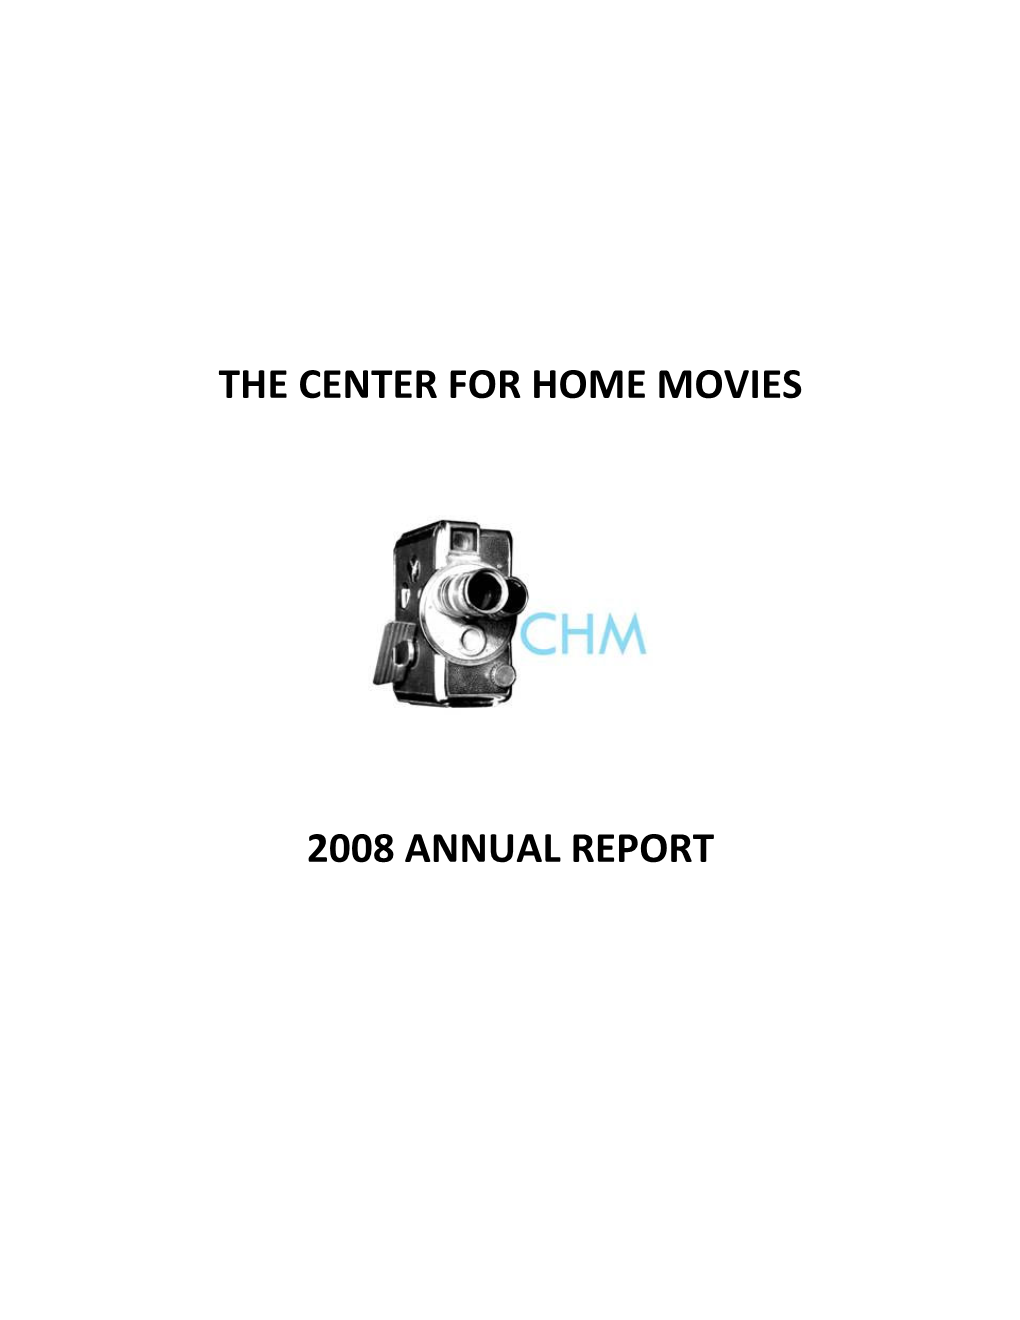 The Center for Home Movies 2008 Annual Report